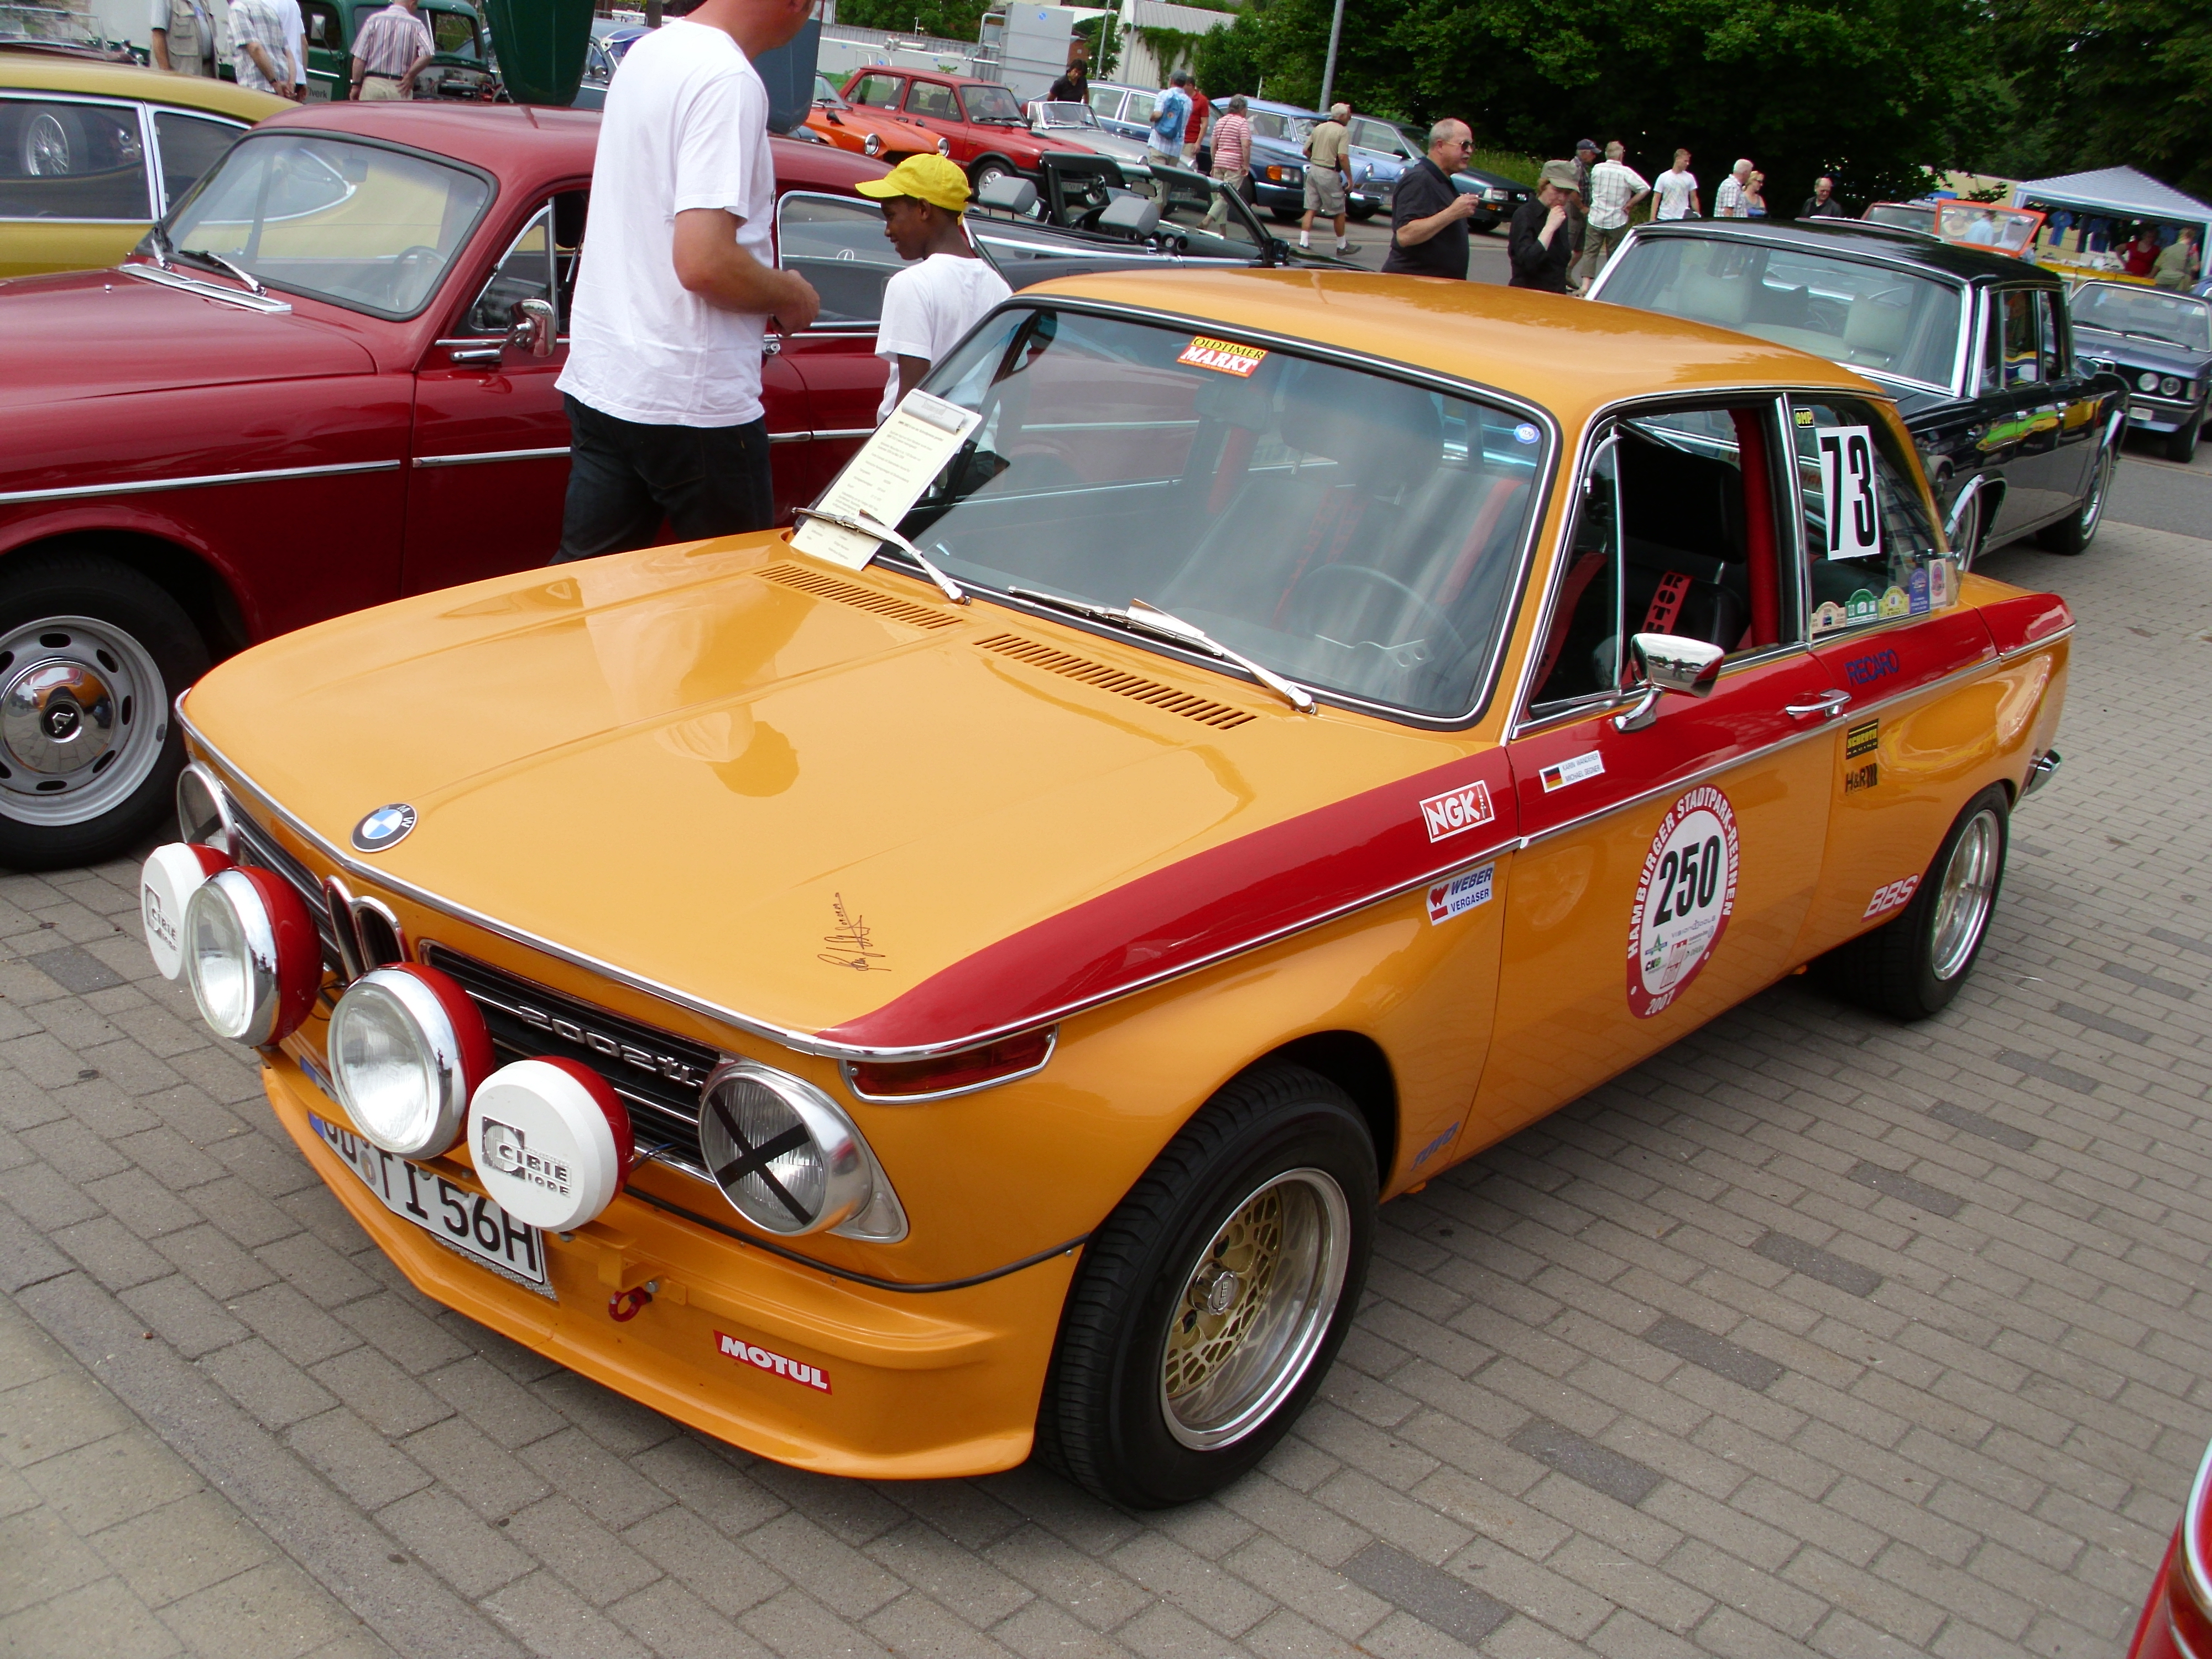 BMW 2002 ti (Ahrend-Tuning) 1970 -2- | Flickr - Photo Sharing!